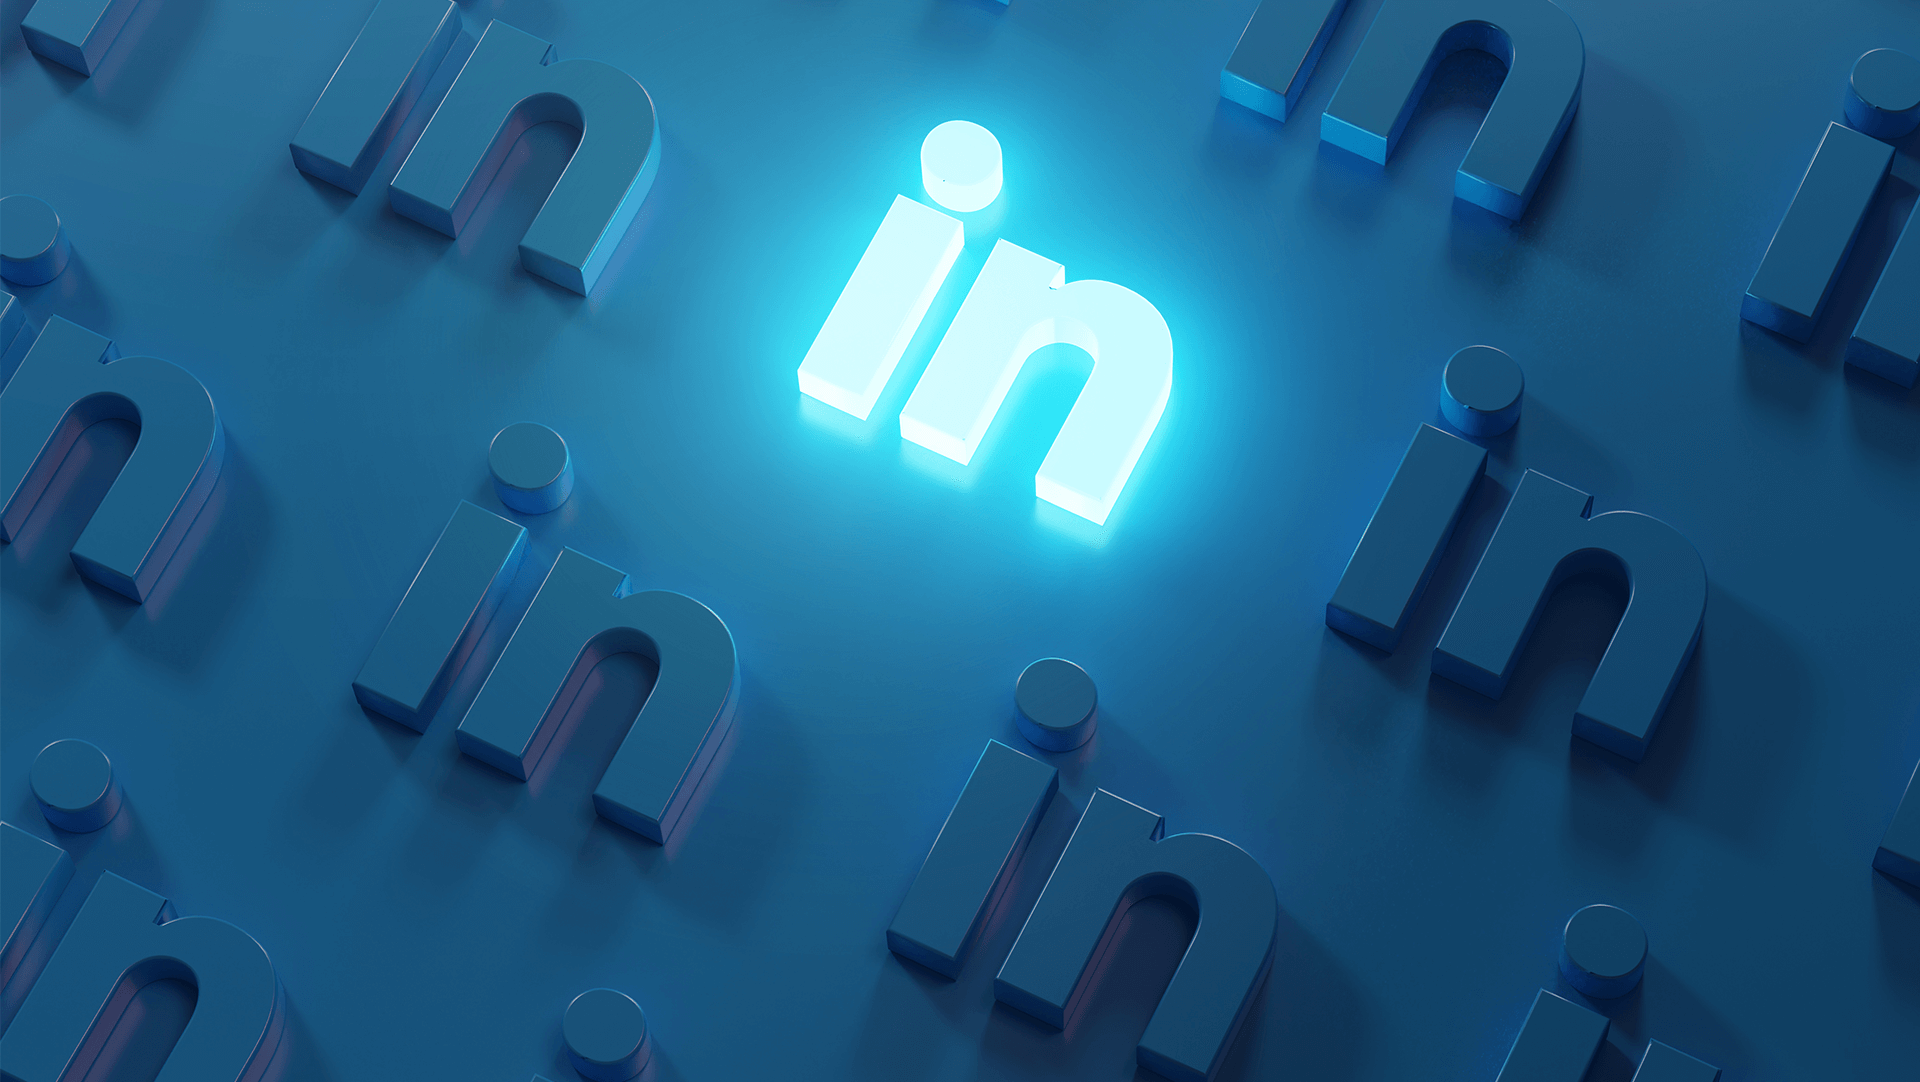 A collection of linkedin icons in different shades of blue, with the central icon illuminated and standing out from the rest.